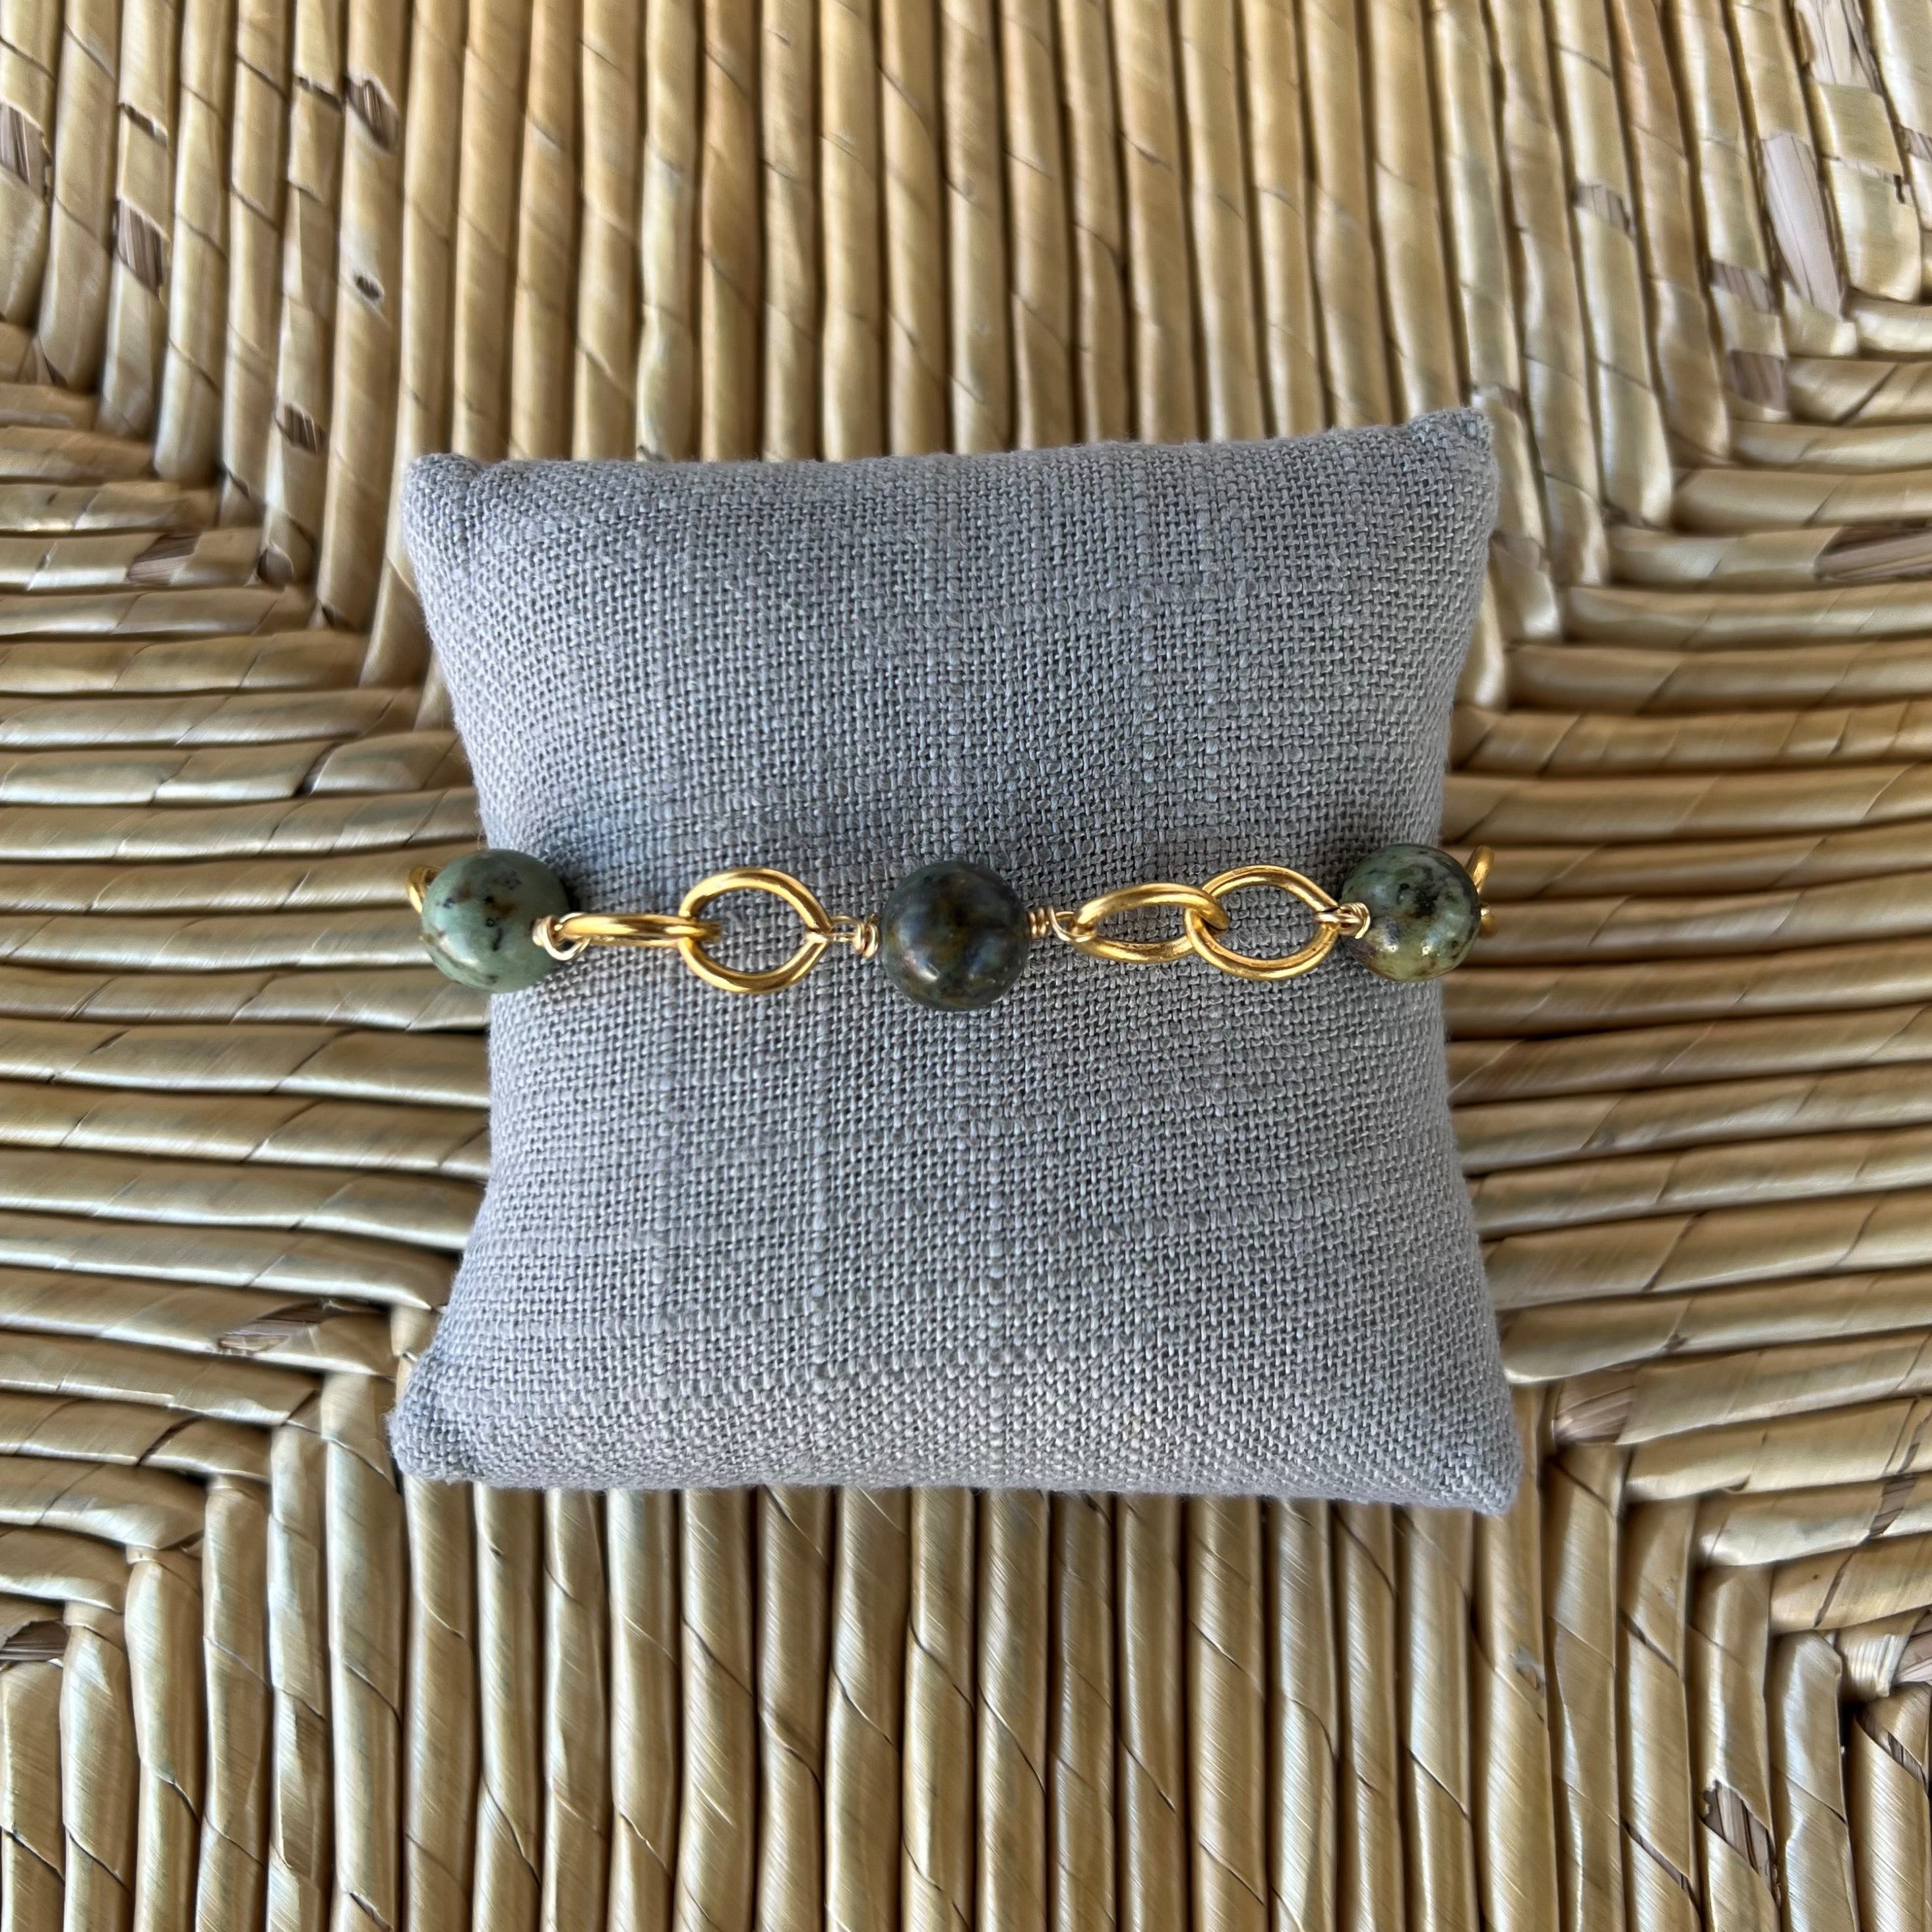 Bead and Chain Bracelet